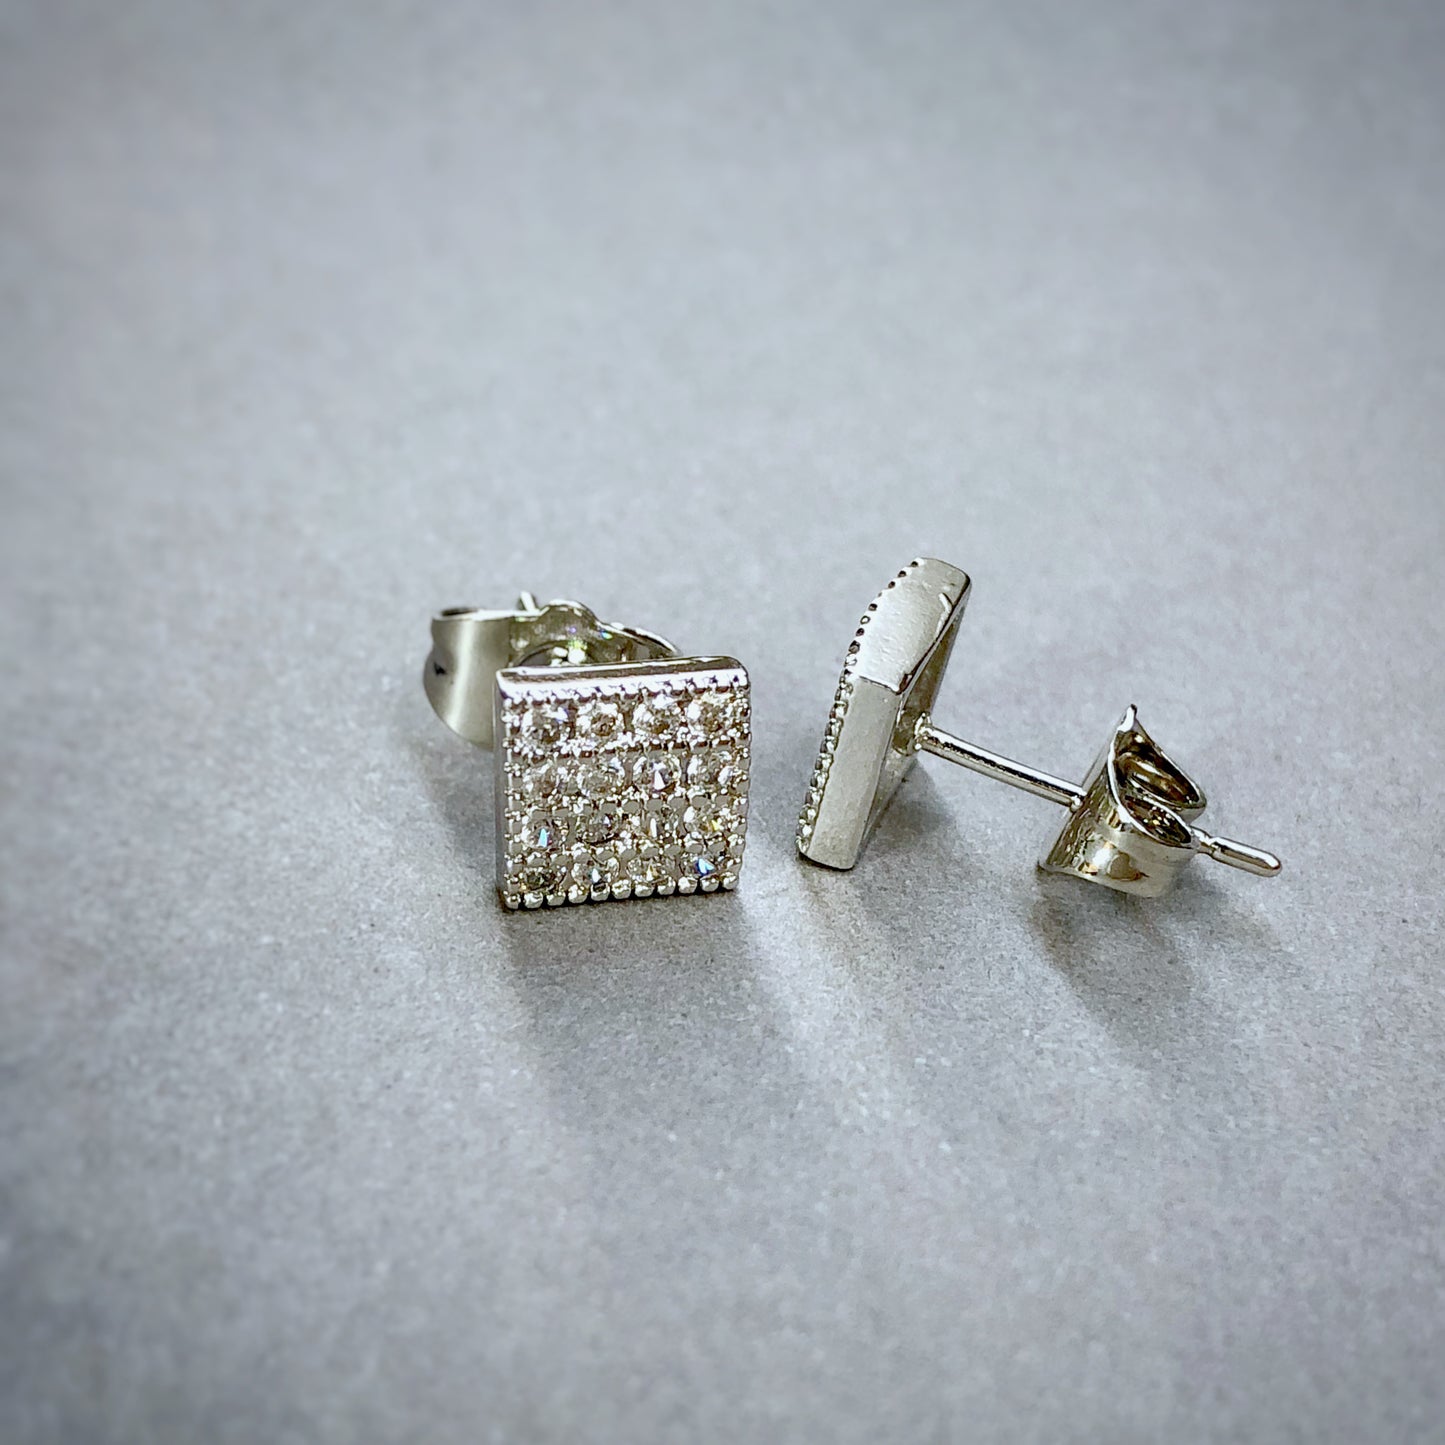 The Simple Square Stud